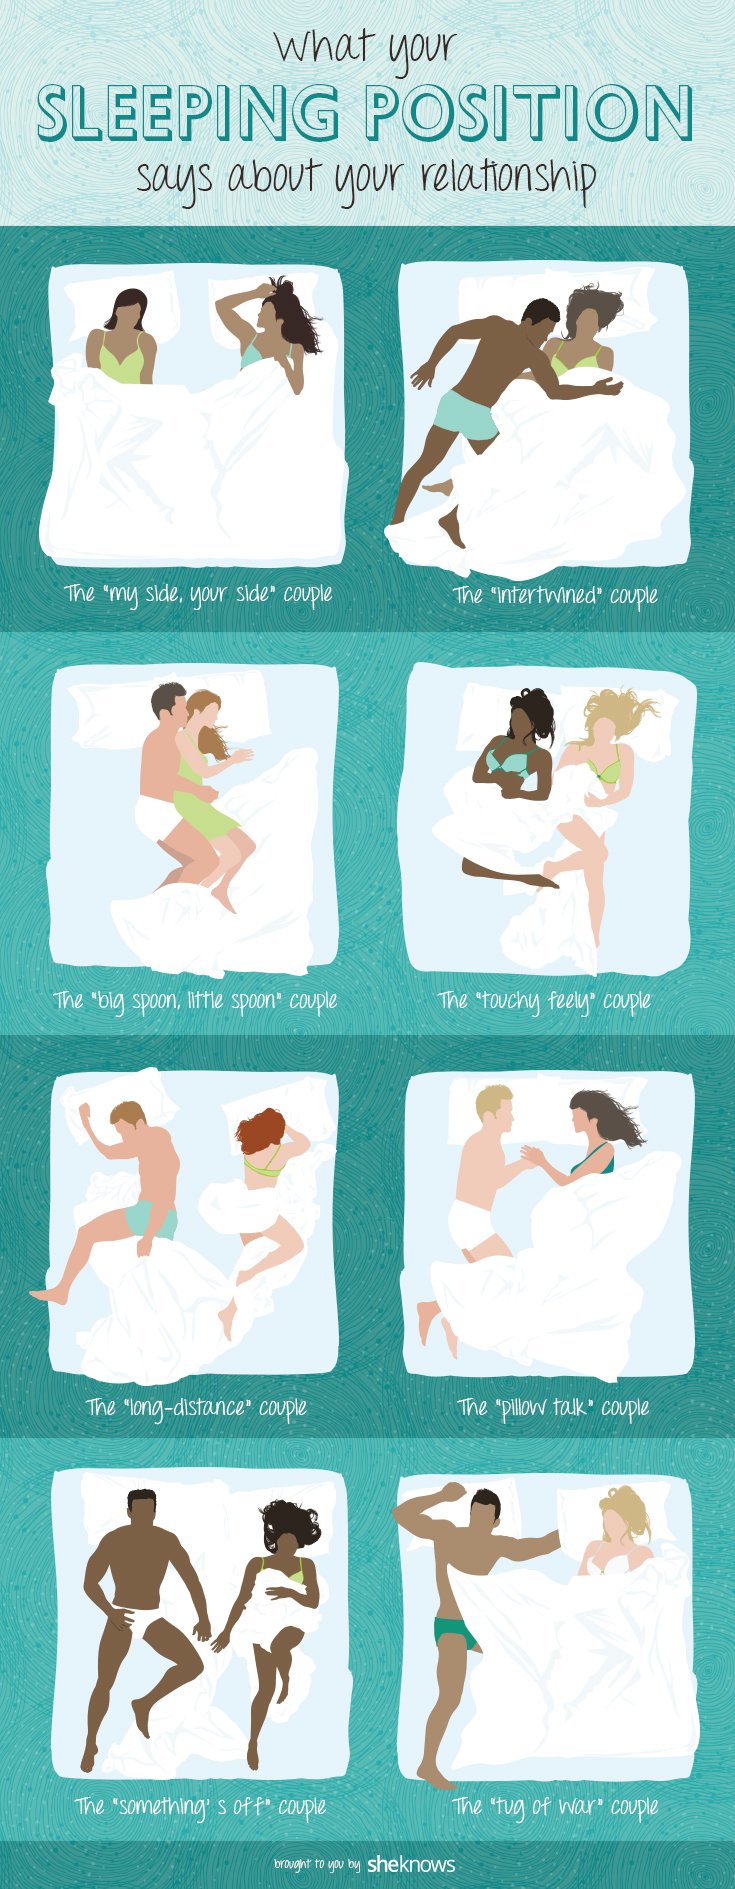 What Your Sleeping Position Says About Your Relationship 8 Photos 12408